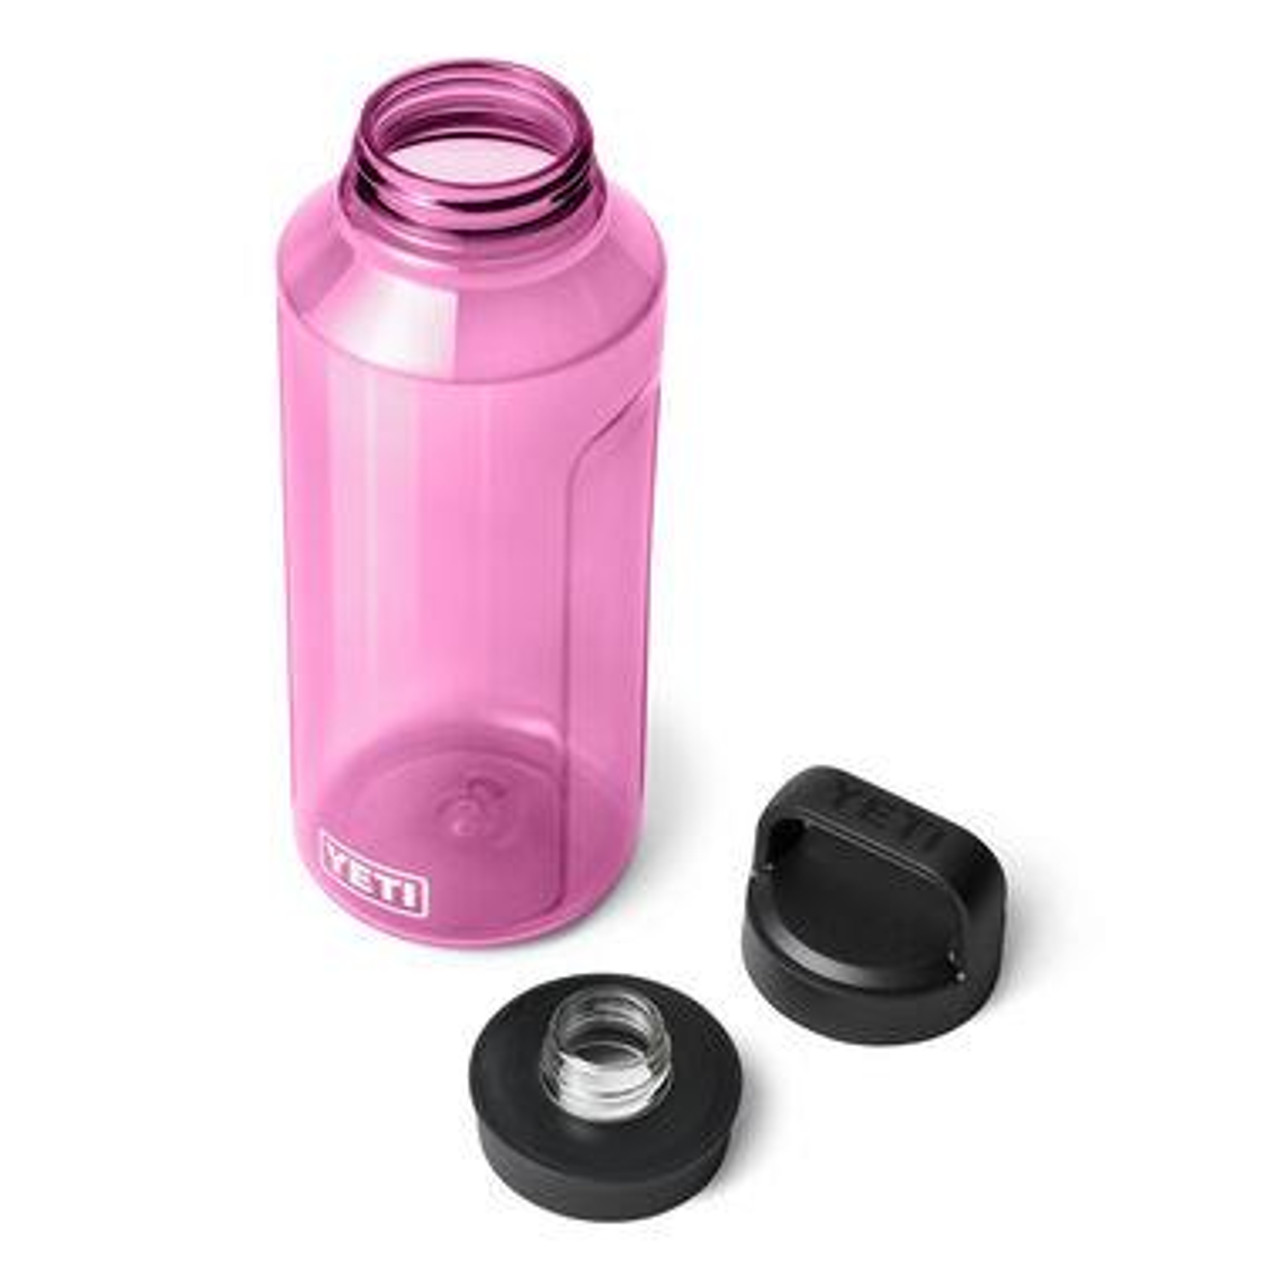 https://cdn11.bigcommerce.com/s-d4f5hm3/images/stencil/1280x1280/products/66578/161491/Yeti-Yonder-1-5L-50oz-Water-Bottle-Pink-With-Chug-Cap-888830323014_image1__20775.1699295728.jpg?c=2